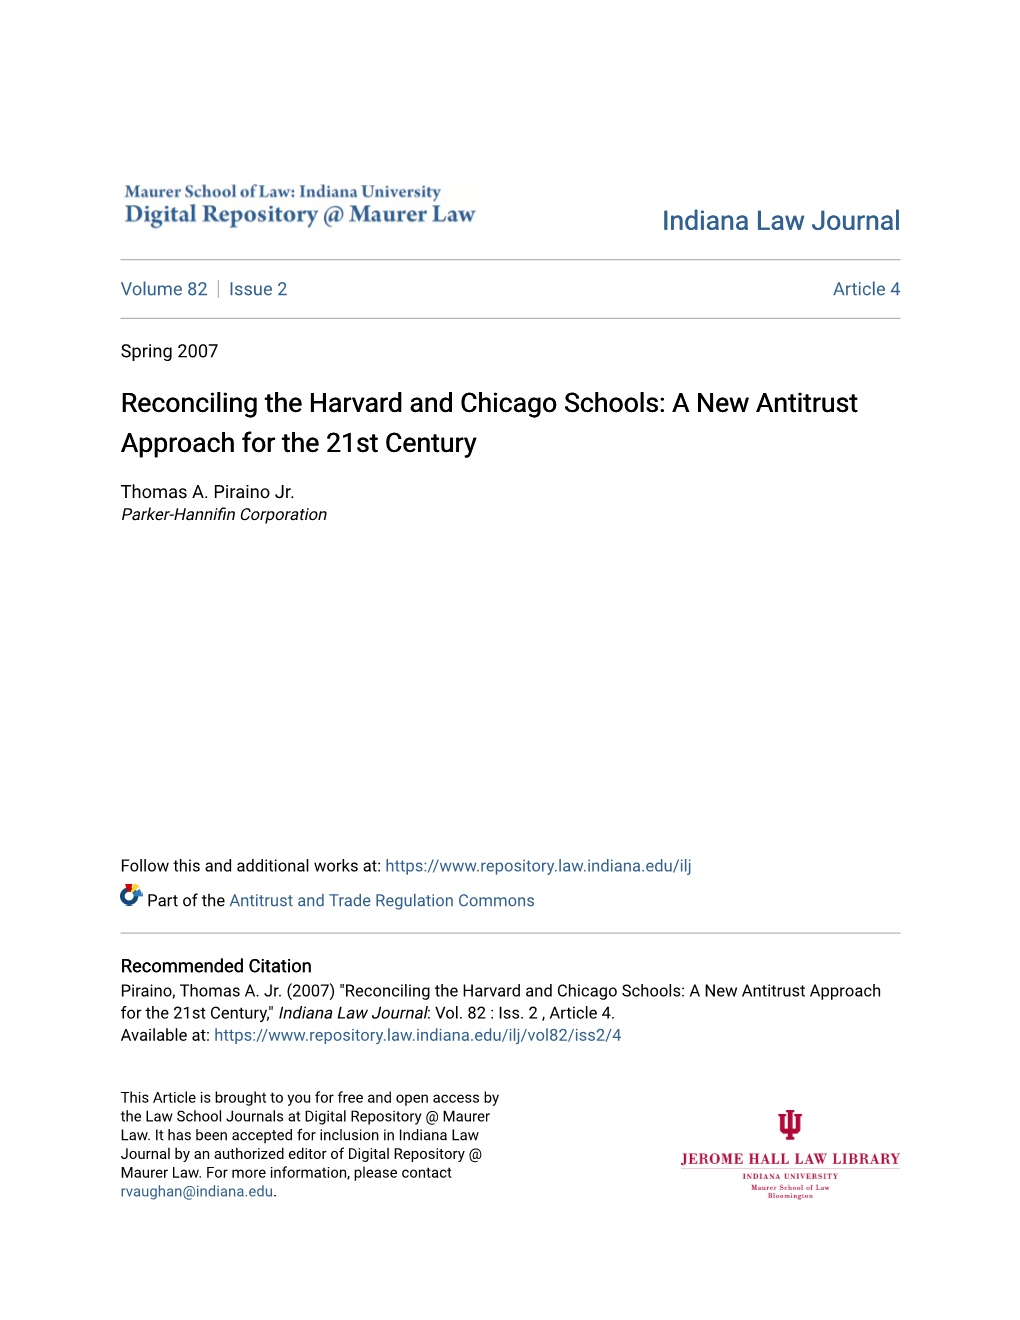 Reconciling the Harvard and Chicago Schools: a New Antitrust Approach for the 21St Century